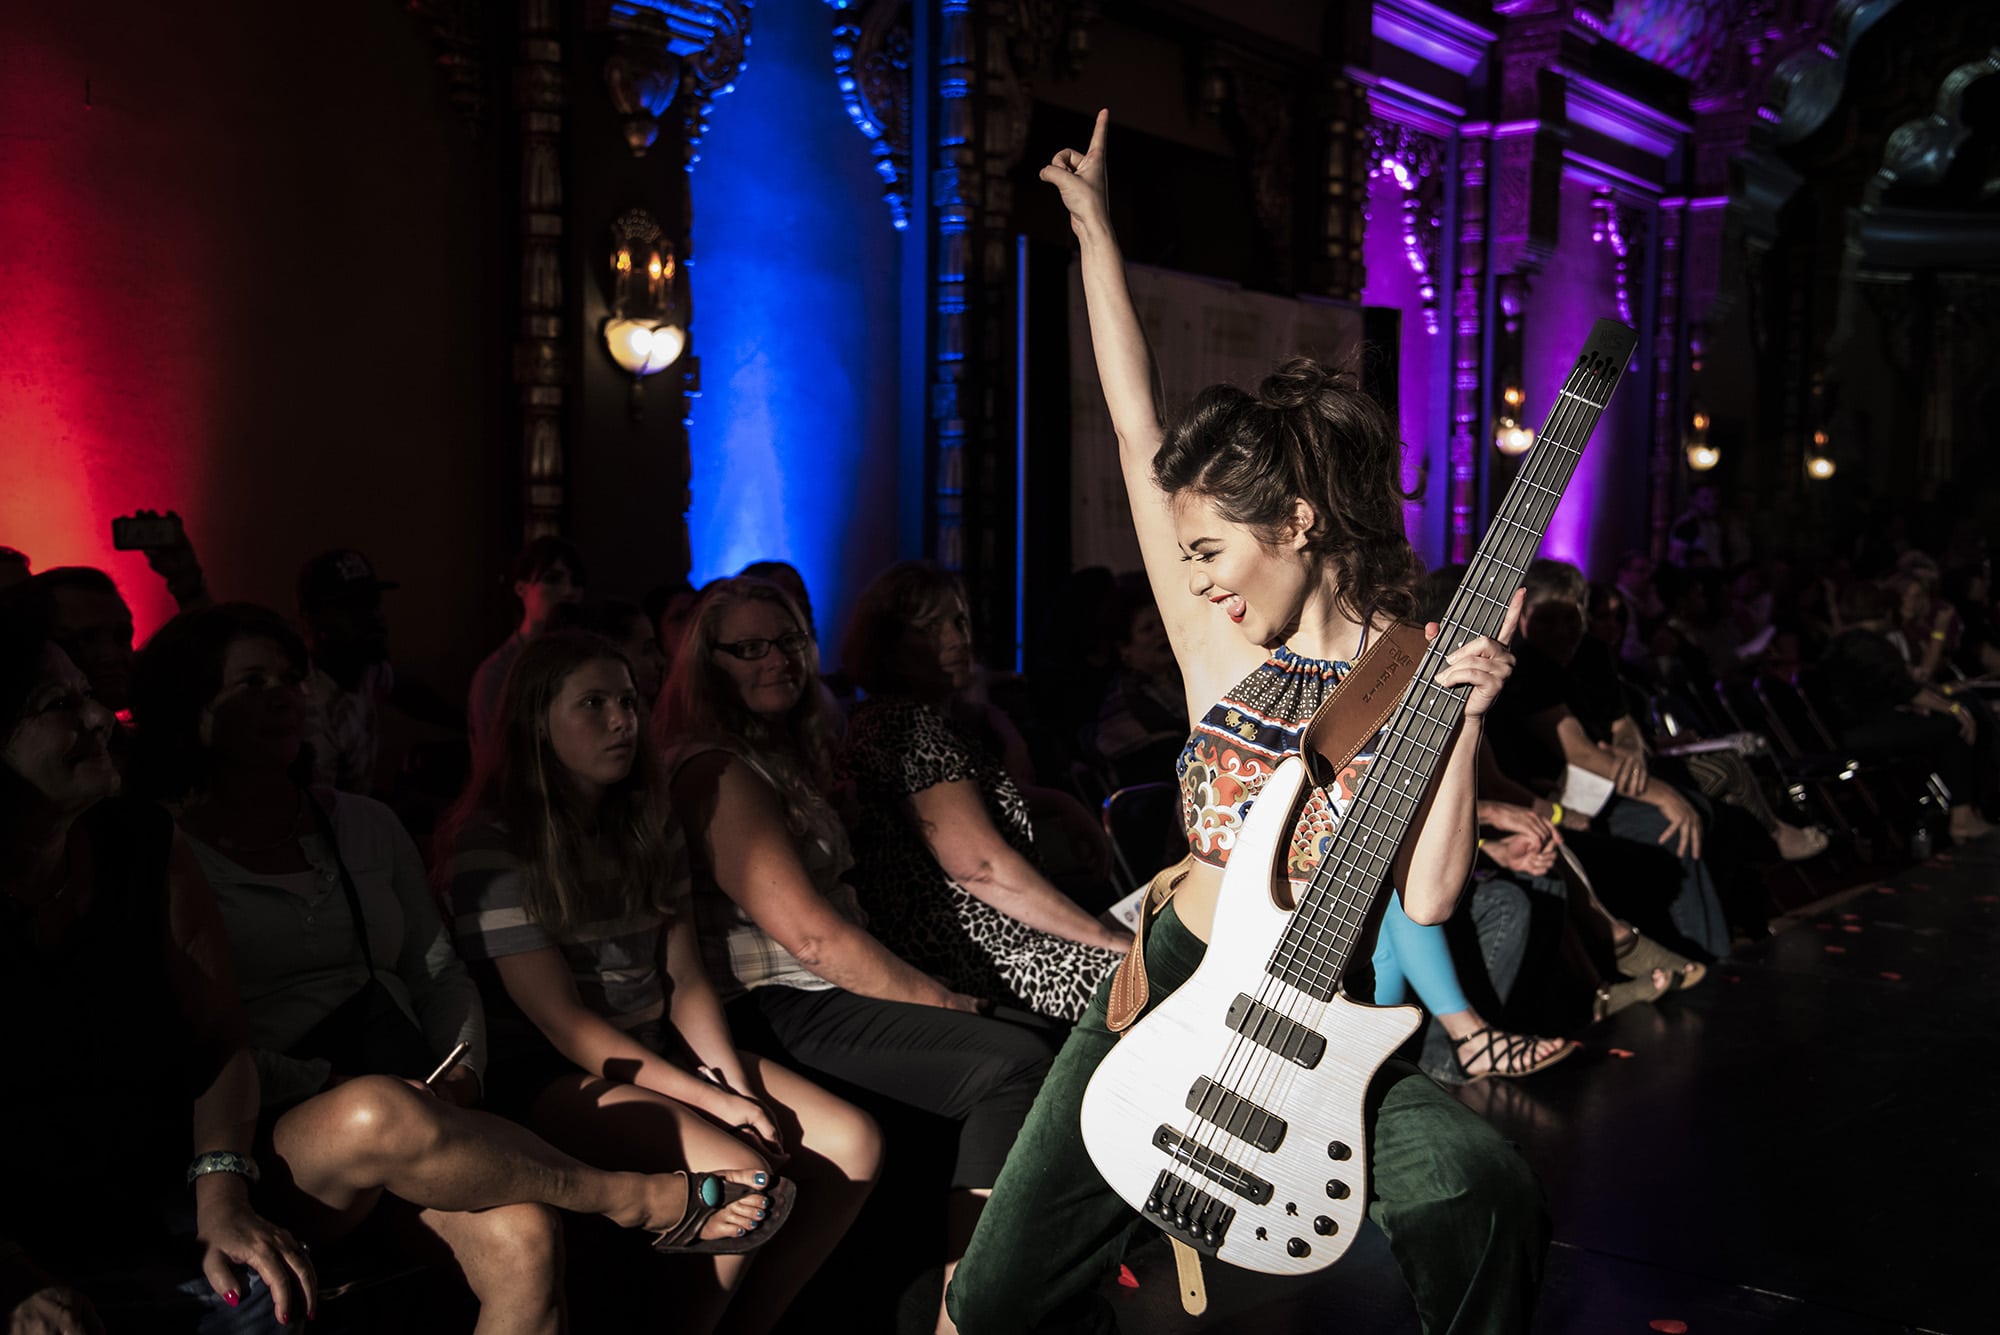 Ish Guitars are featured at the 7th annual Syracuse Style Runway Fashion Show at Landmark Theatre.